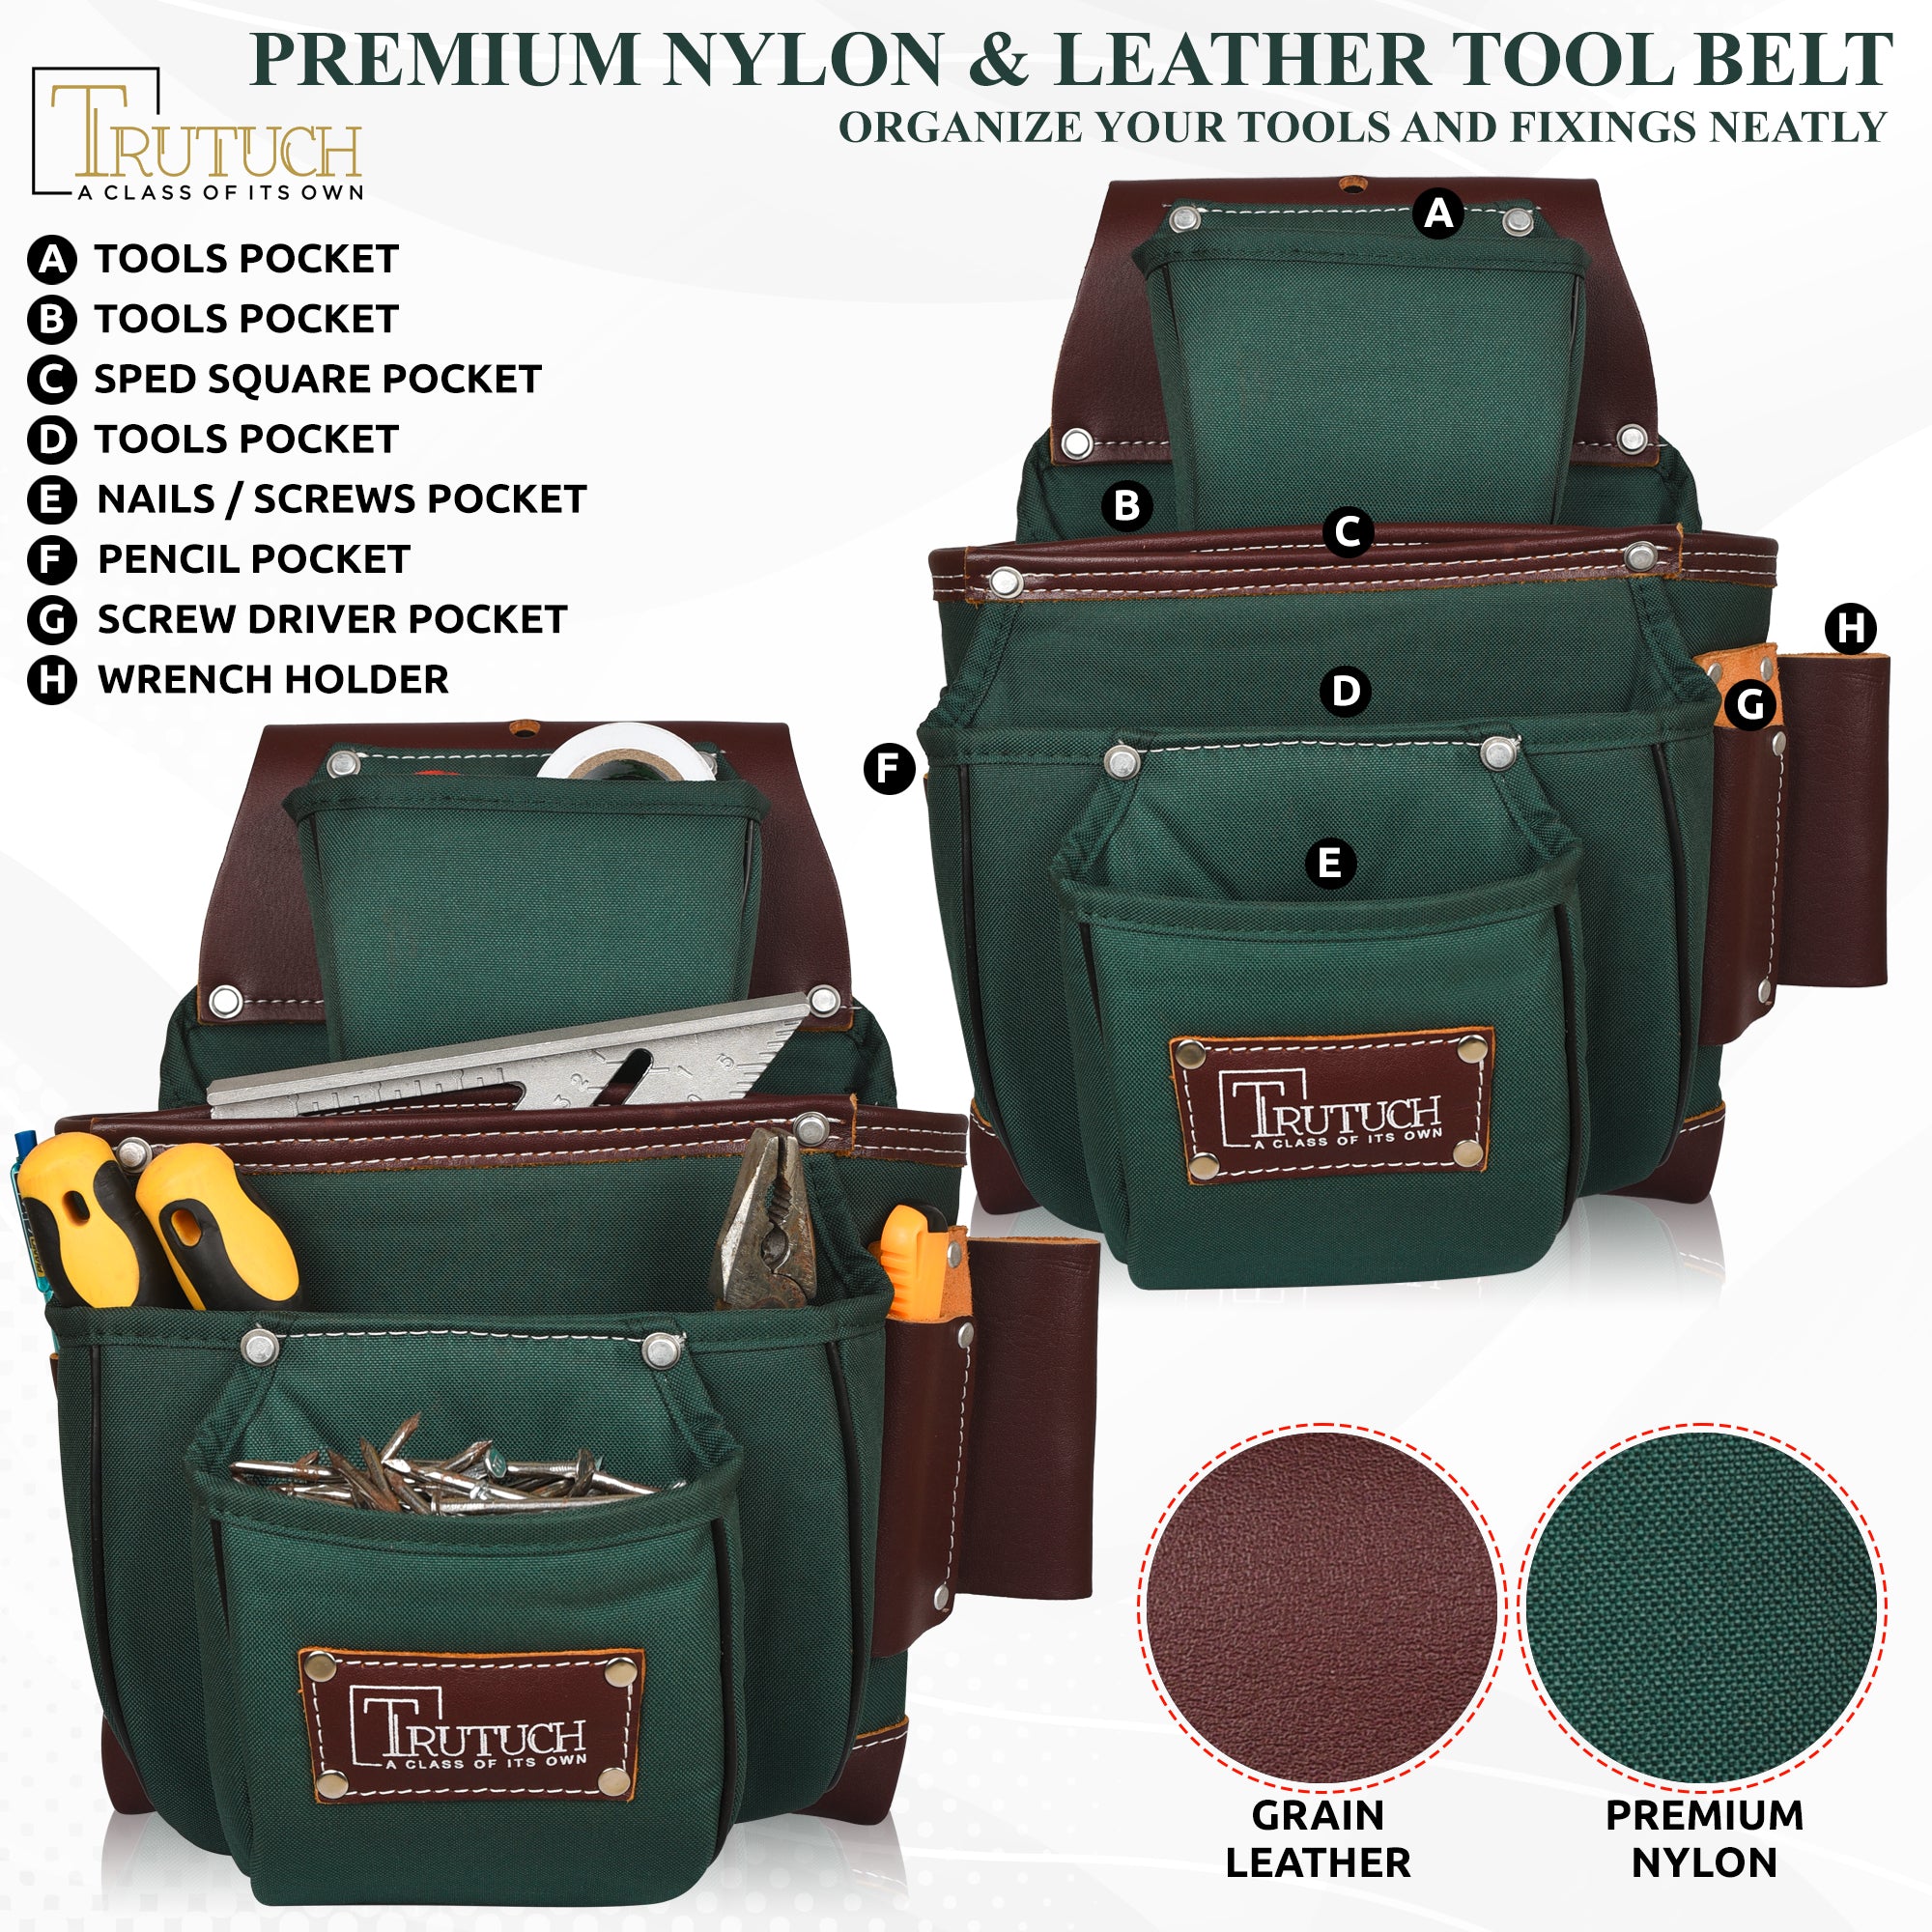 Trutuch Green Nylon & Leather Tool Belt with Leather Work Suspender, Framers Tool Belt, Electrician, Construction, Drywall Tool Belt, TT-1530-R-7030-S